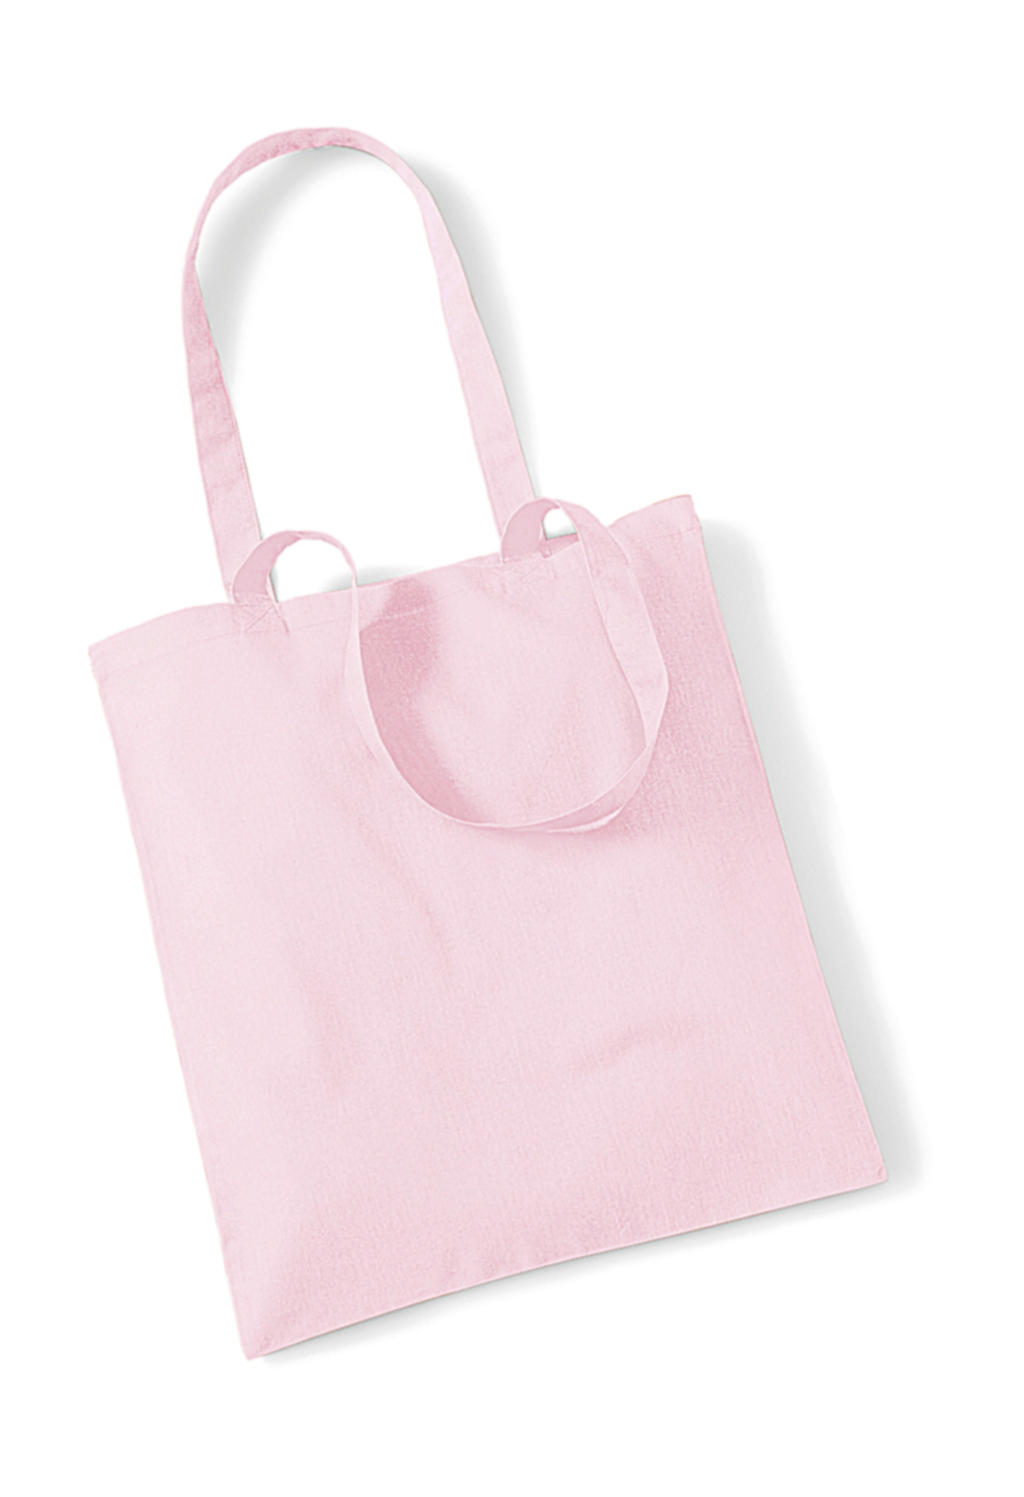  Bag for Life - Long Handles in Farbe Pastel Pink